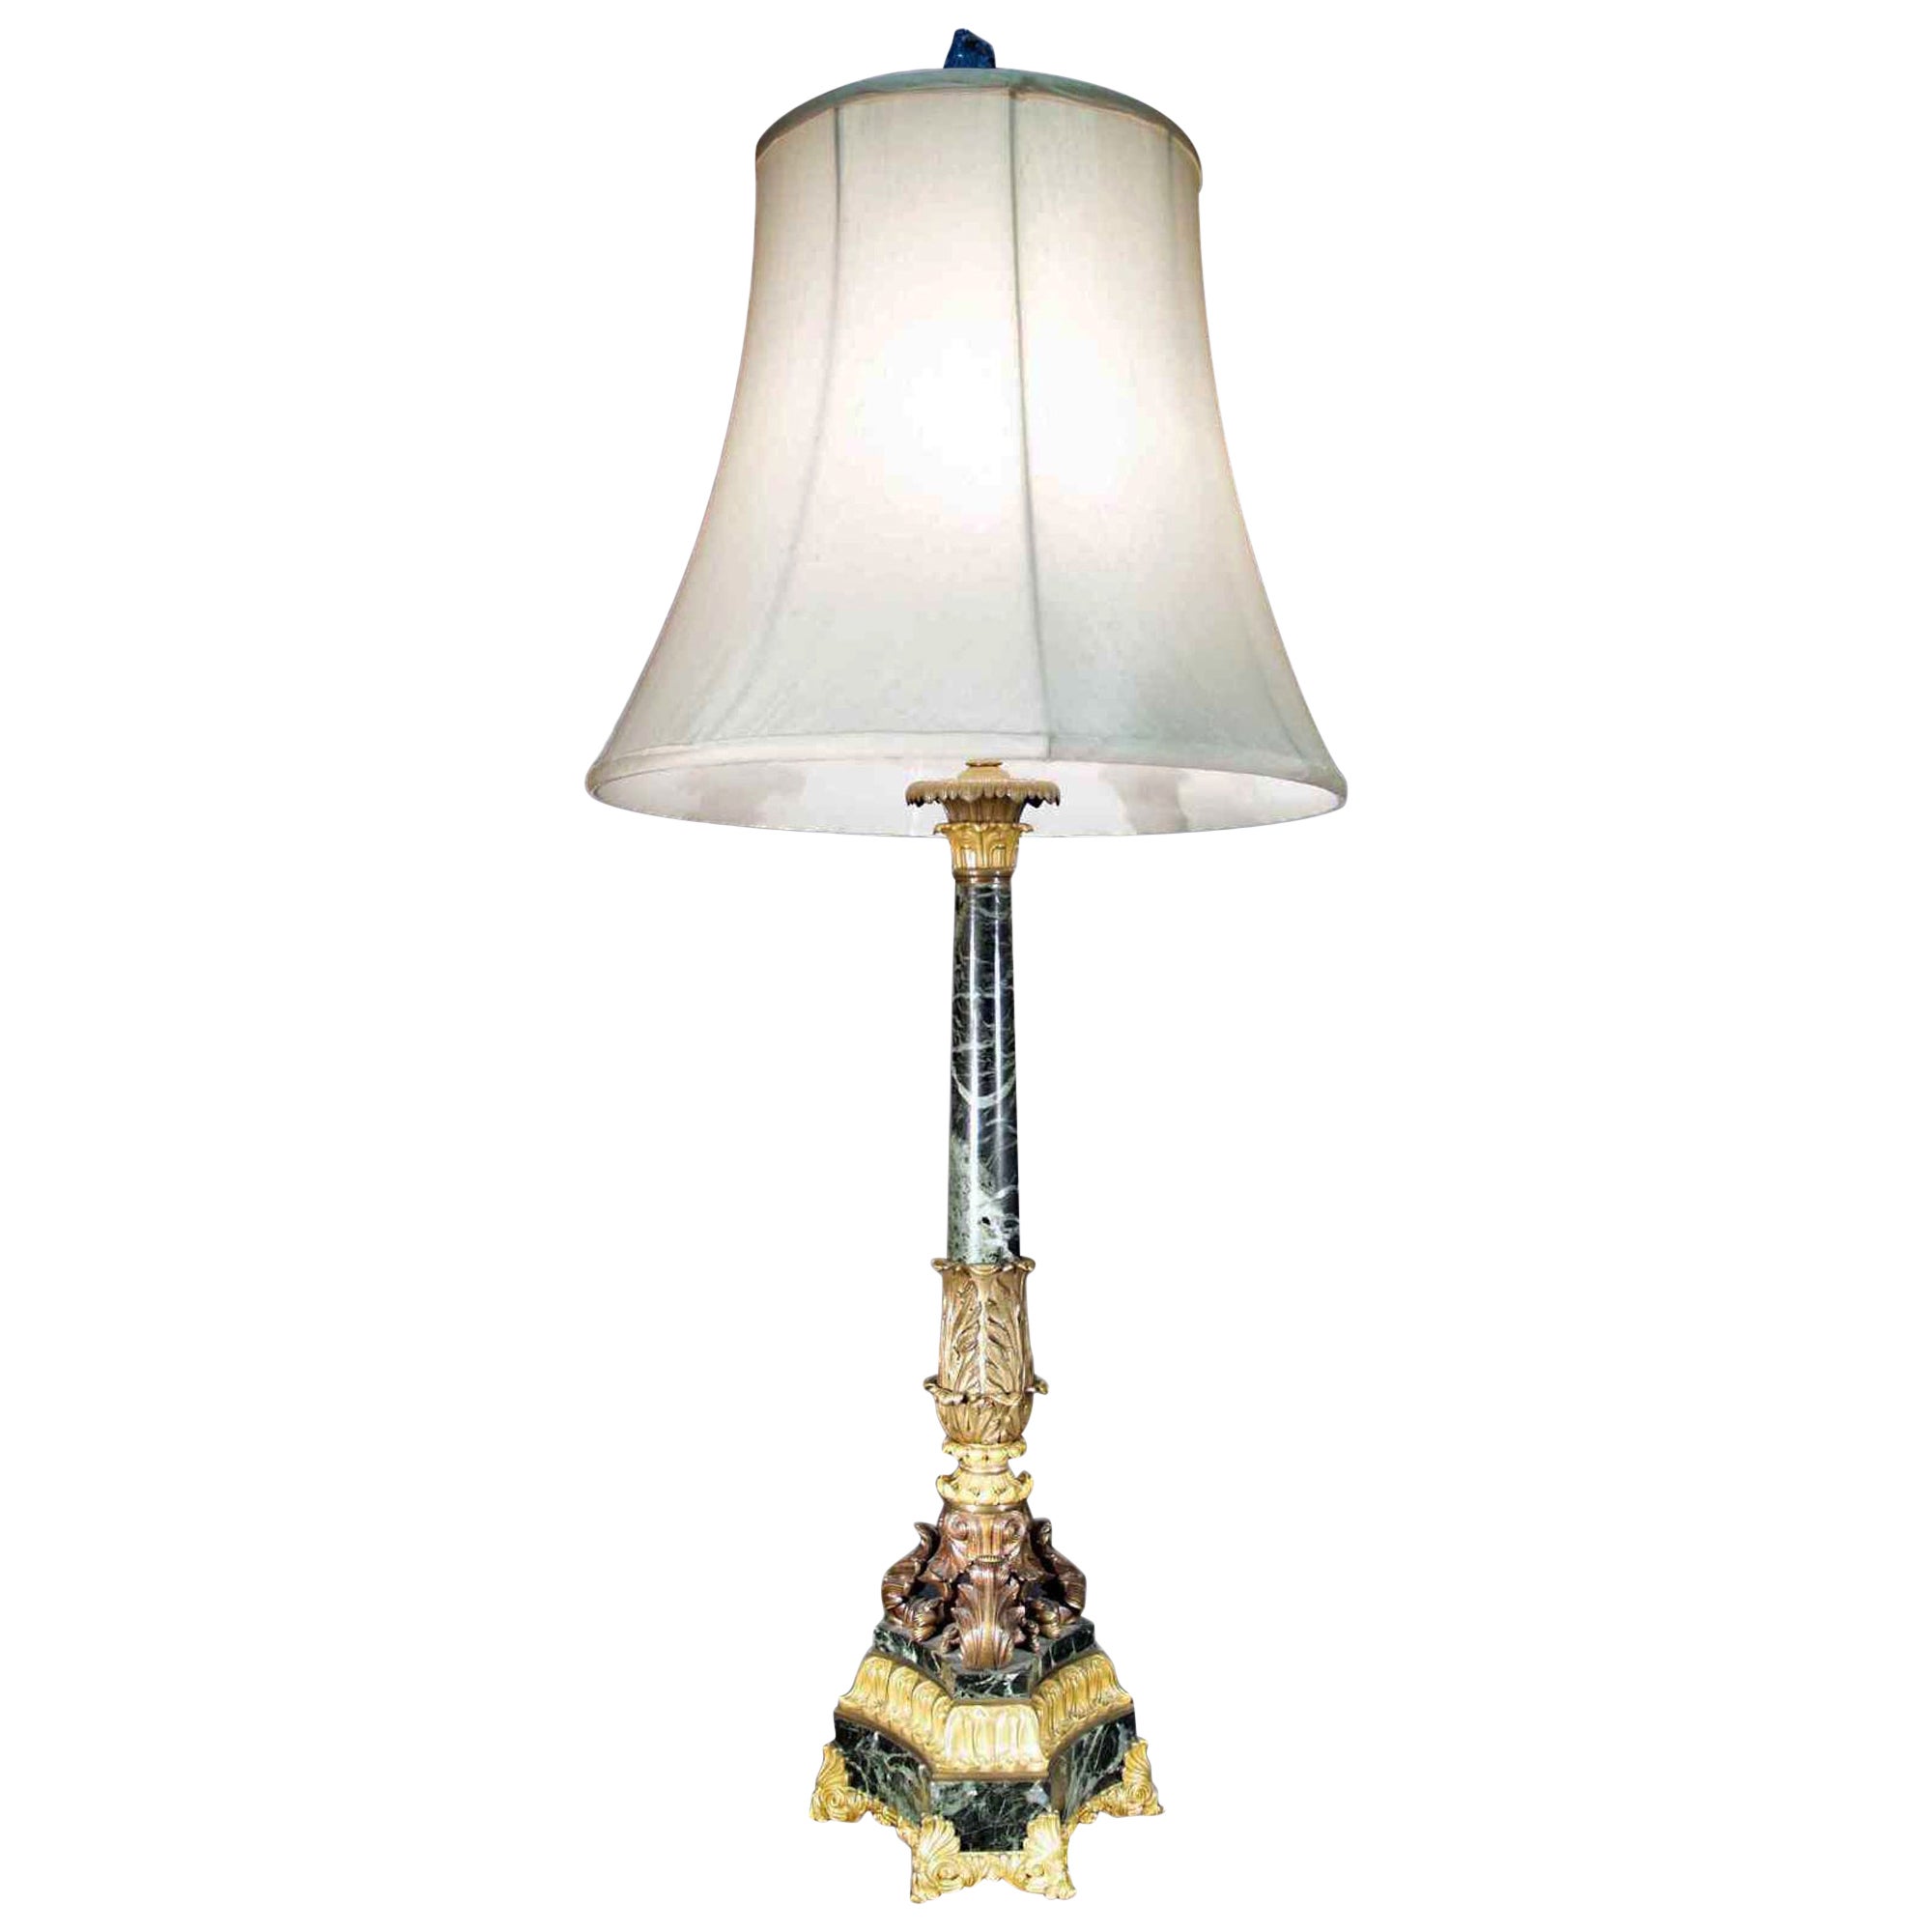 French 19th Century Neo-Classical Verde Antico Marble Lamp For Sale